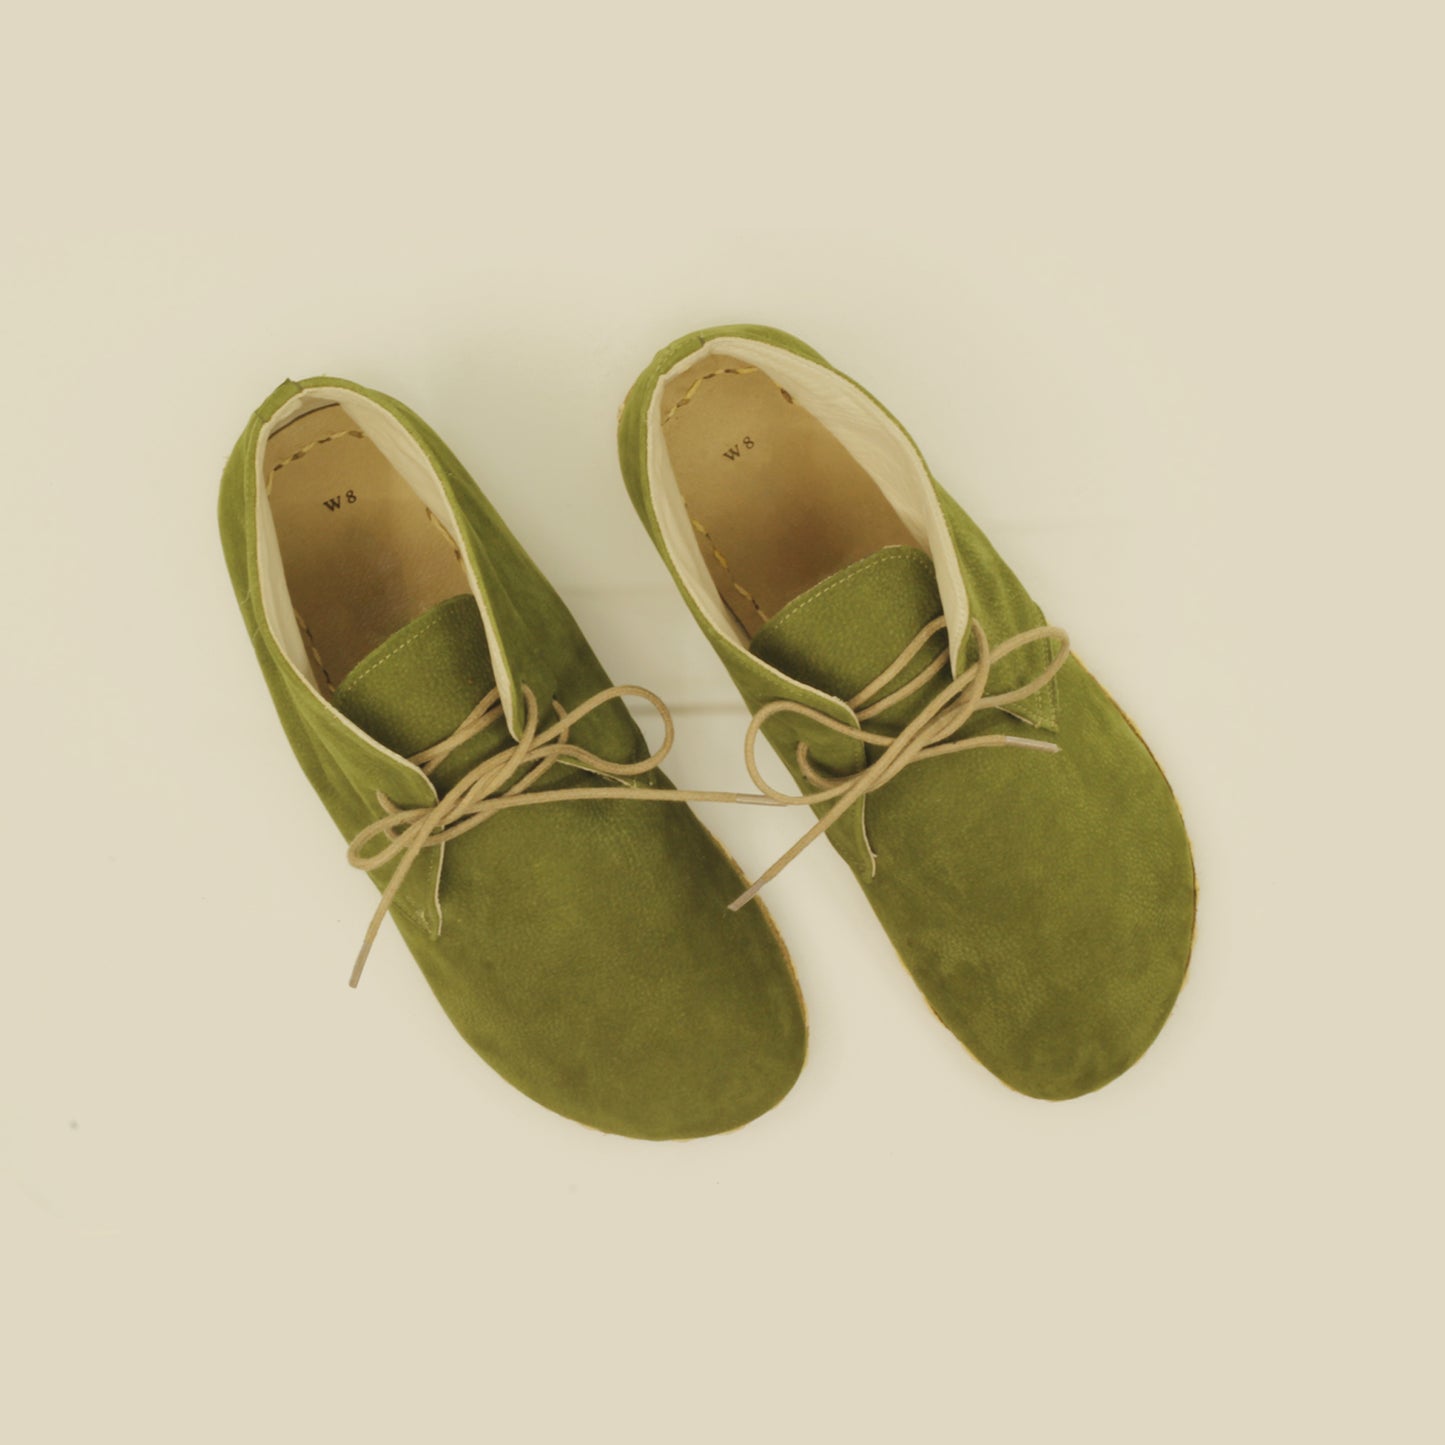 Handmade Zero Drop Barefoot Leather Boots for Women - Oxford Ankle in Green Nubuck